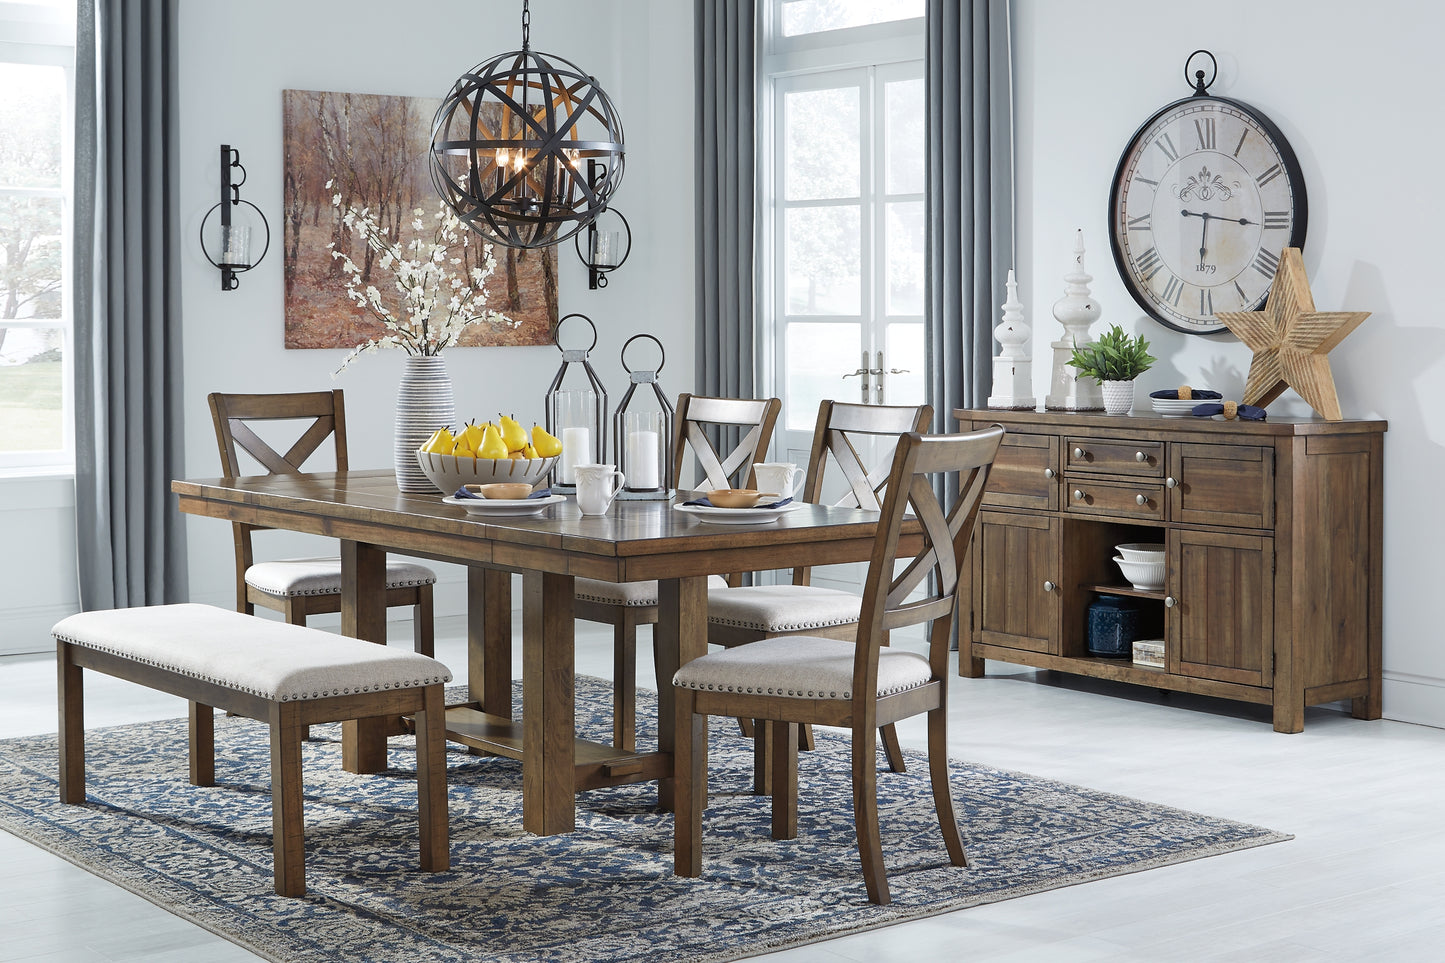 Moriville Dining Table and 4 Chairs and Bench Wilson Furniture (OH)  in Bridgeport, Ohio. Serving Bridgeport, Yorkville, Bellaire, & Avondale